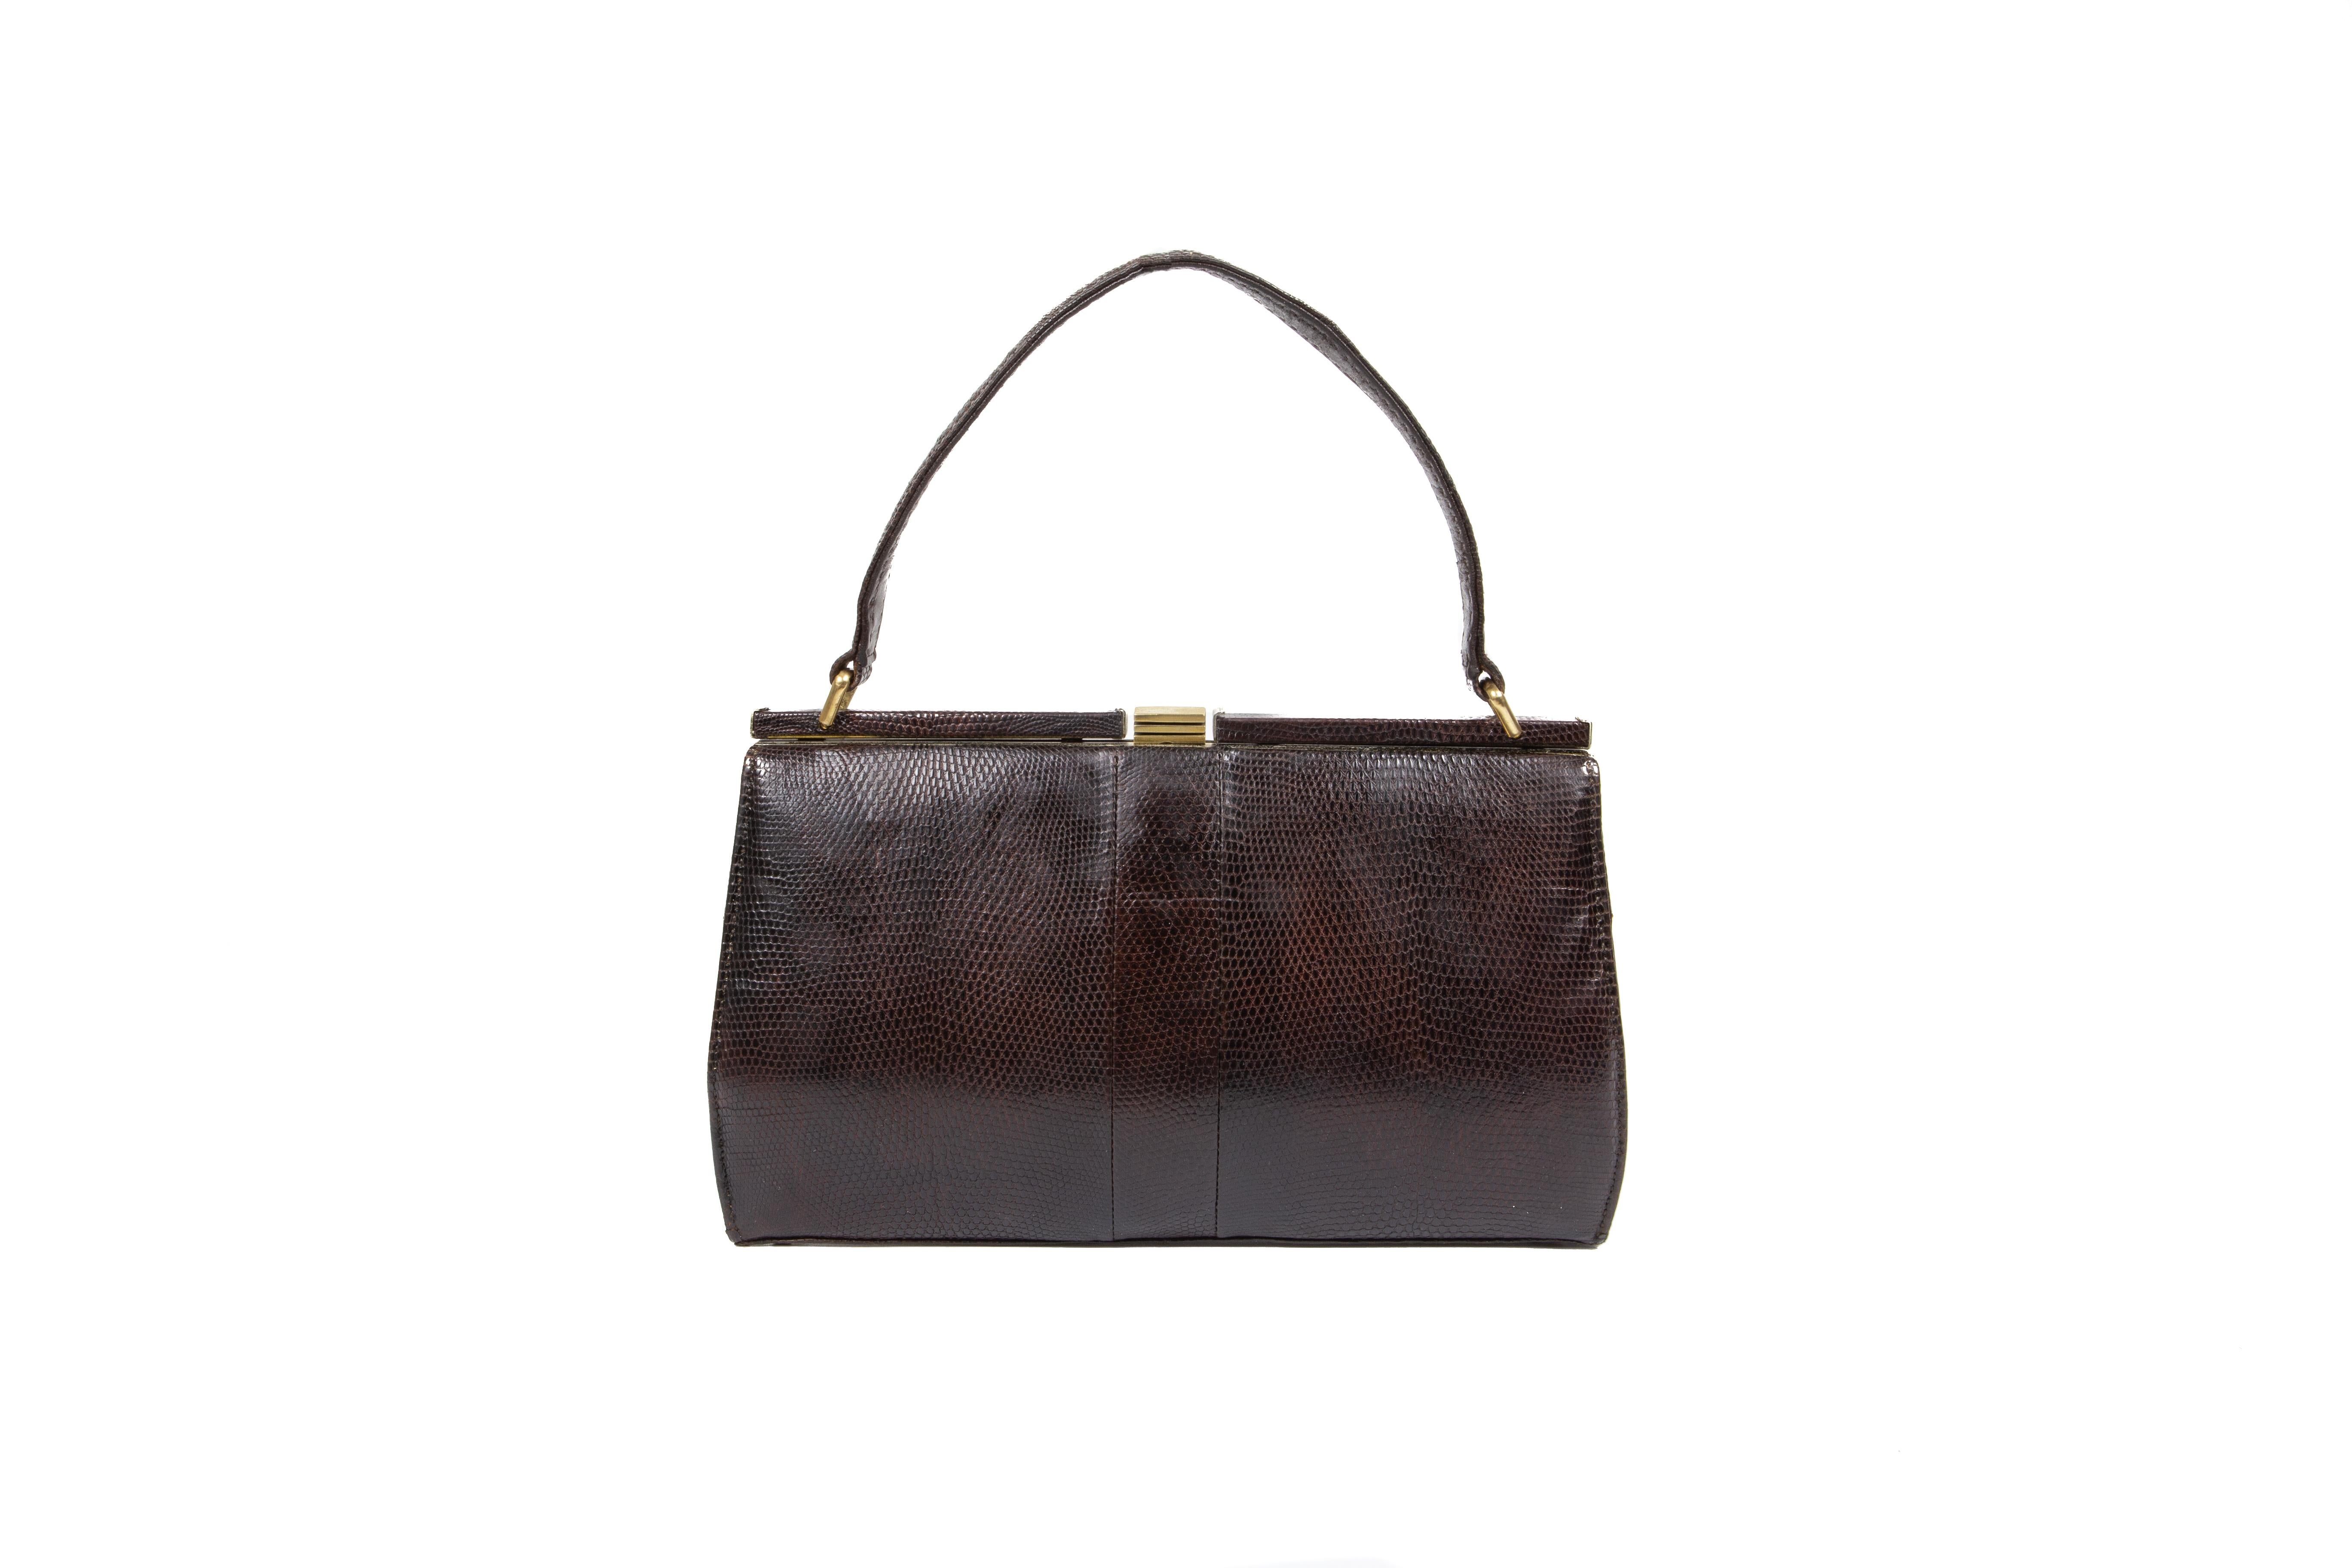 An excellent condition rare late 1940s Mappin & Webb Ltd gently padded dark-bole-brown lizard handbag, comprising of one compartment with one zipper pocket and two patch pockets, fully lined in fulvous-brown suede, mounted on a gilt frame, suspended